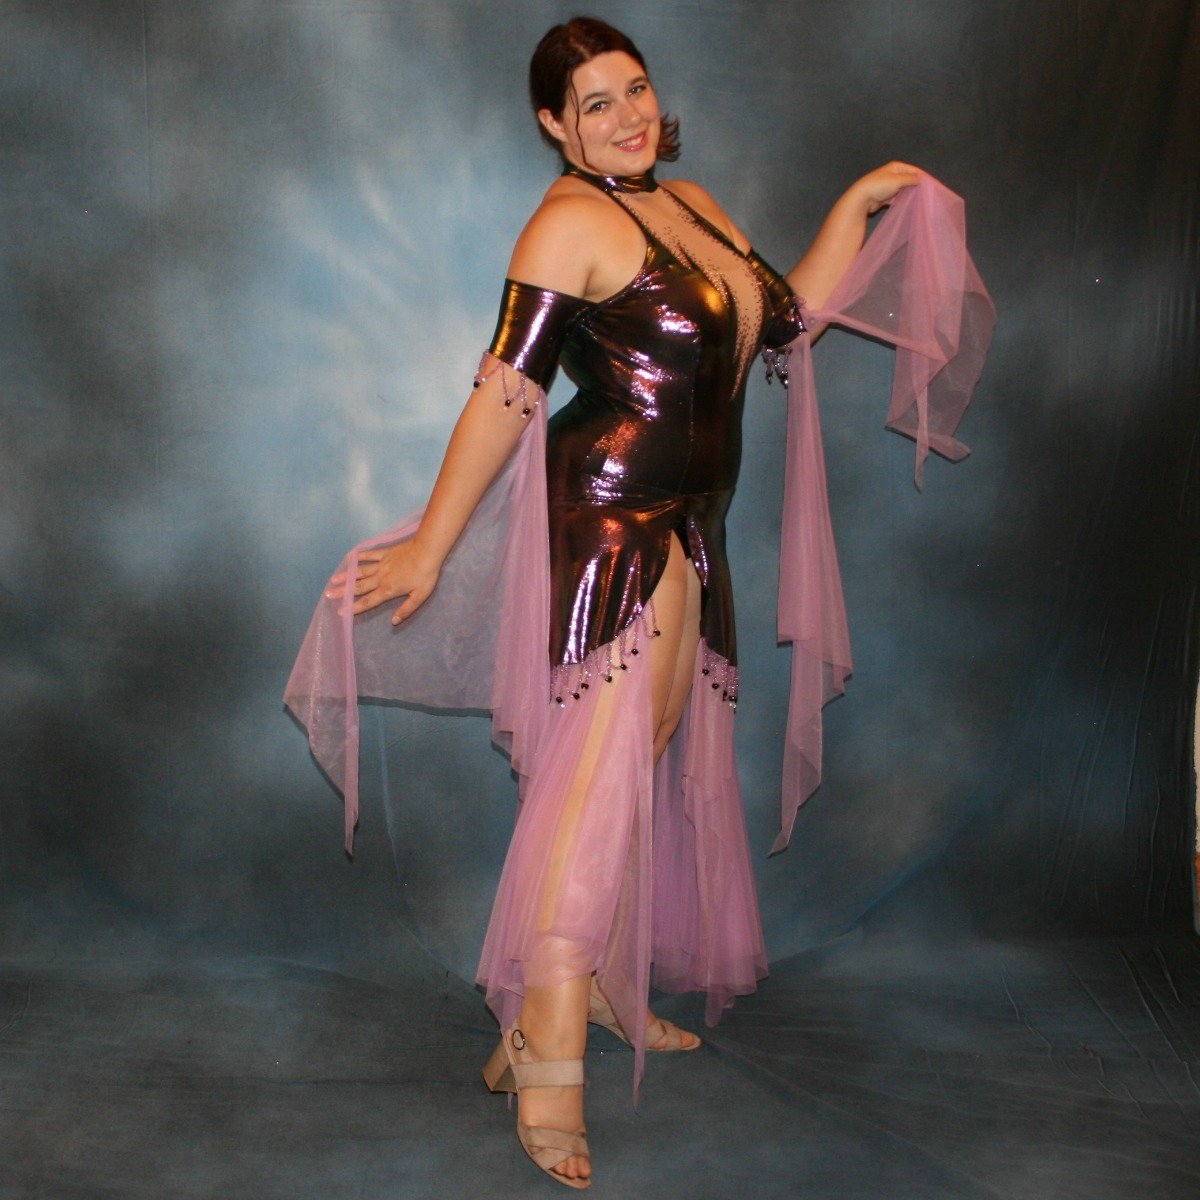 Crystal's Creations side view of  Metallic deep orchid/purple theatrical ballroom dress created in deep orchid/purple metallic lycra with orchid tricot chiffon panel skirt & floats, embellished with orchid Swarovski rhinestone work in bodice, along with hand beading at skirt edge & arm bands.